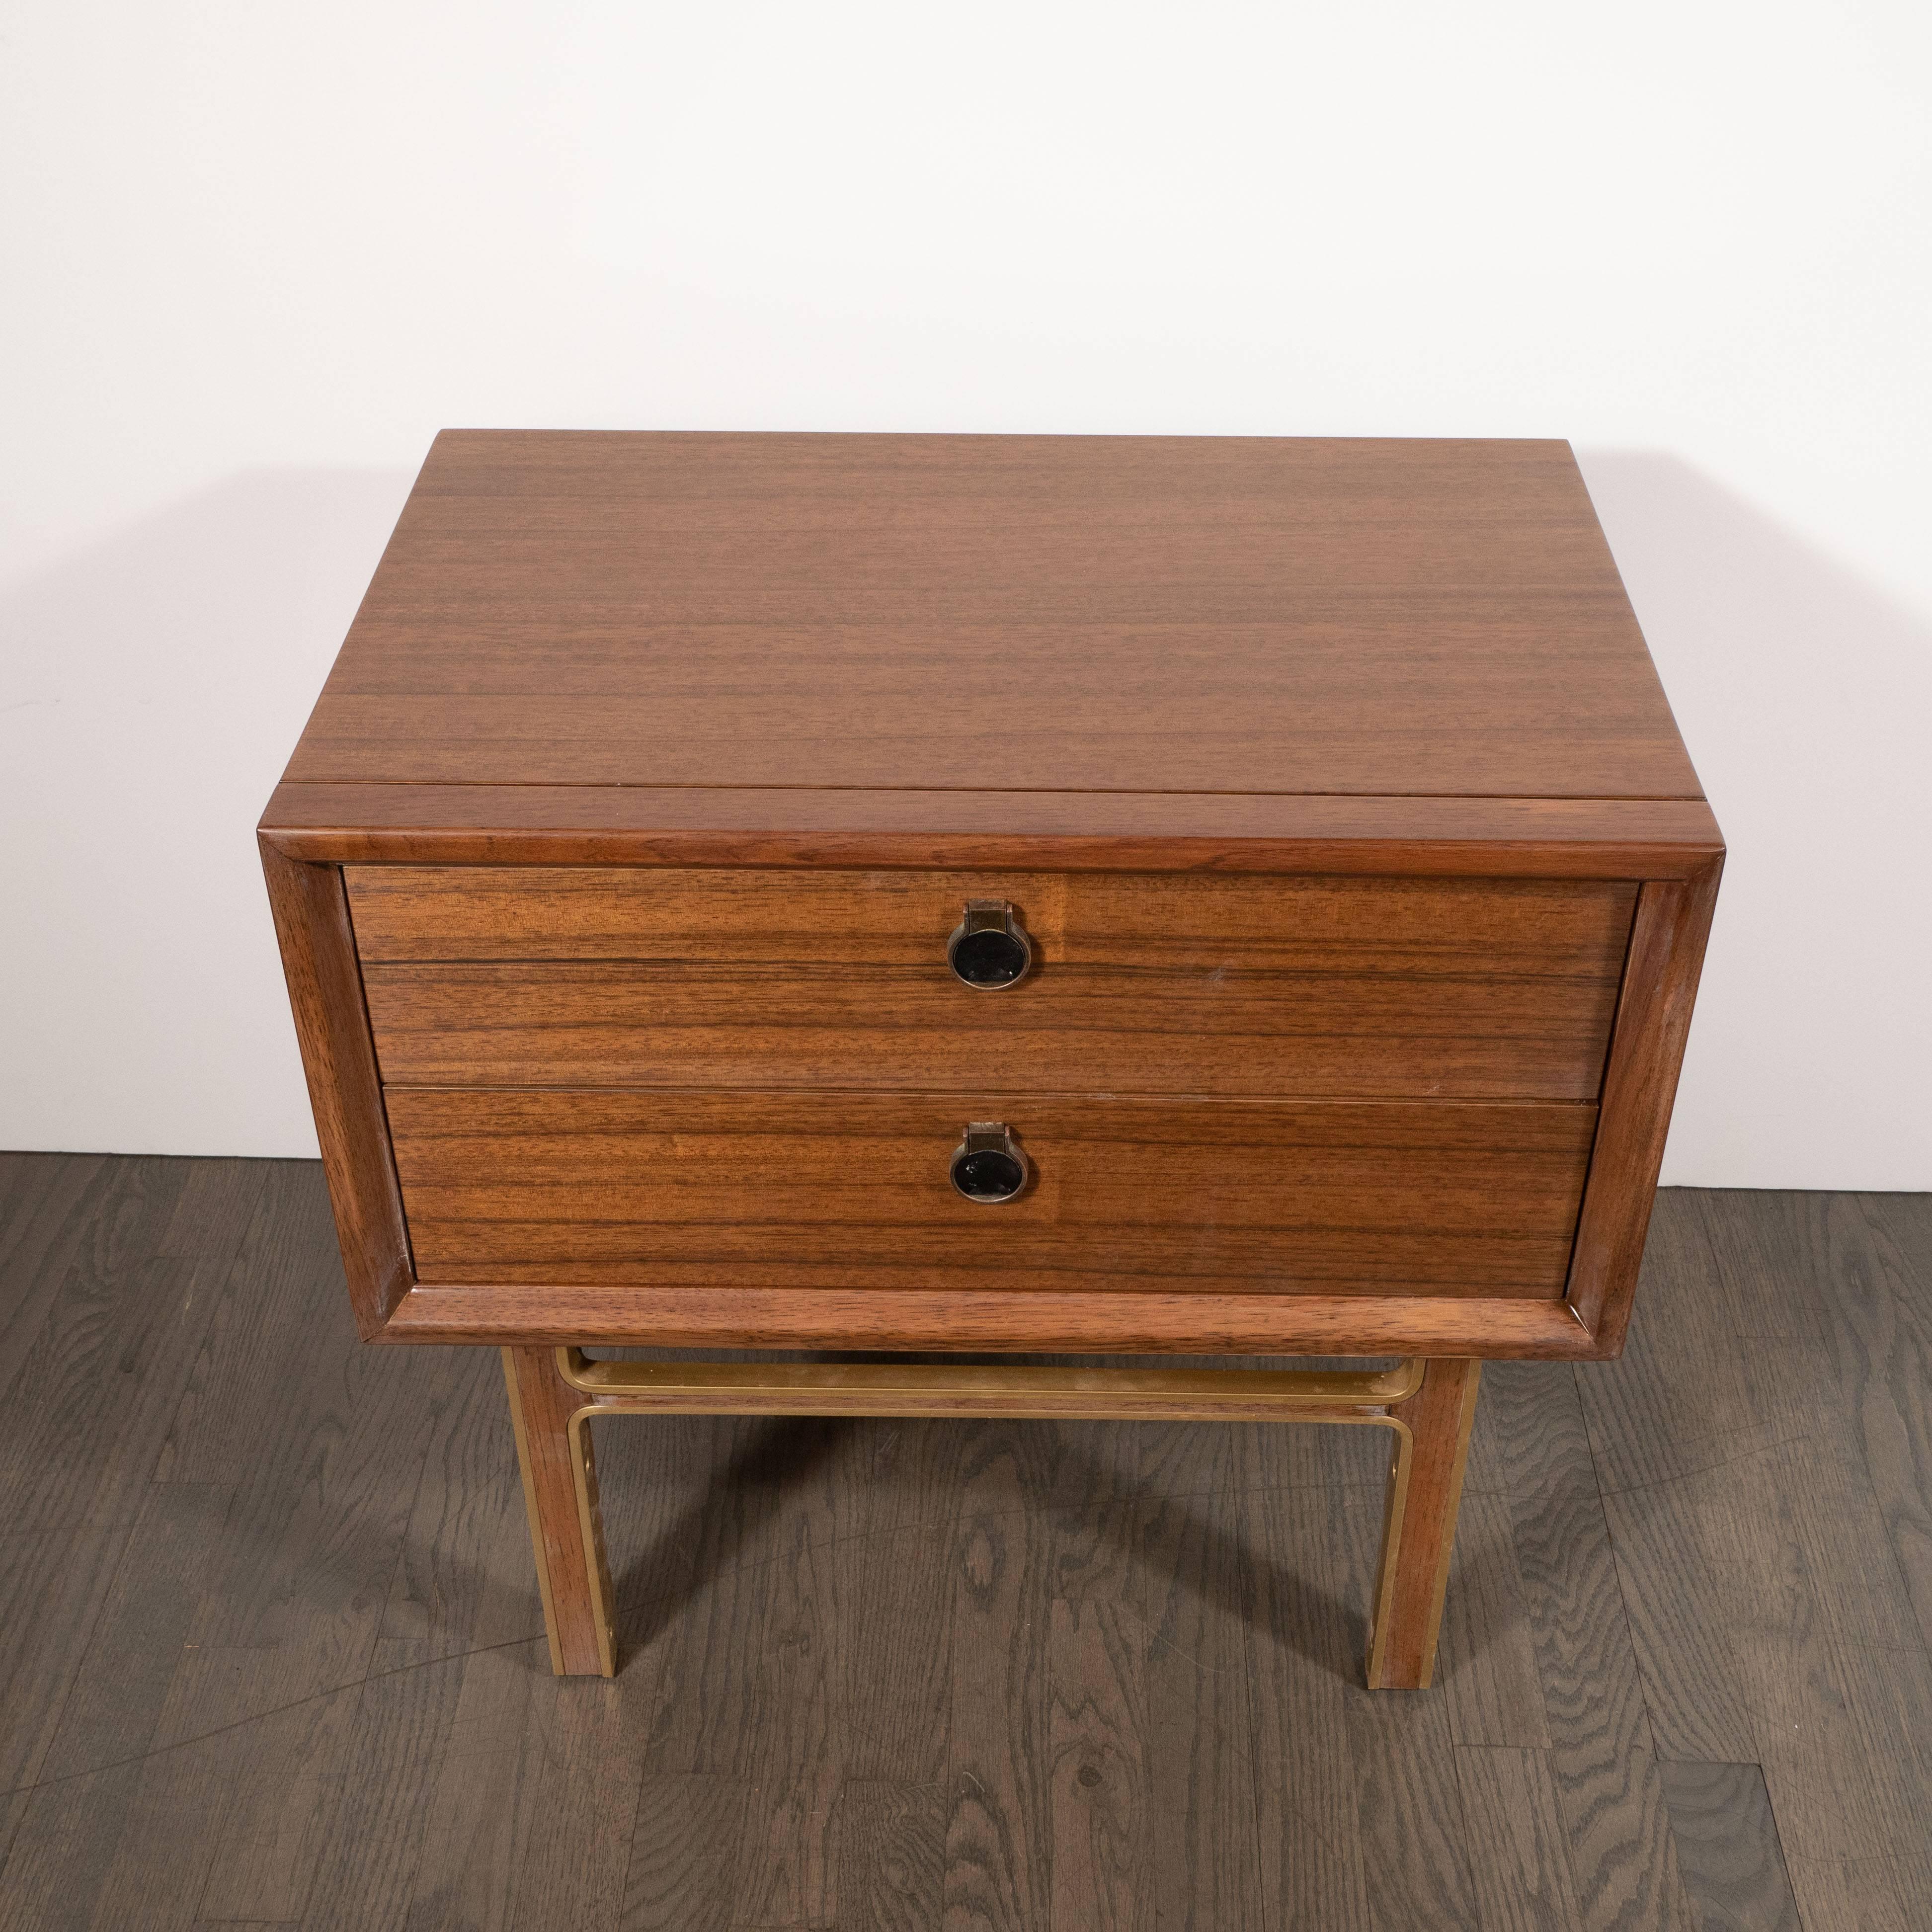 Mid-20th Century Pair of Mid-Century Modern Bookmatched Walnut Nightstands with Brass Pulls